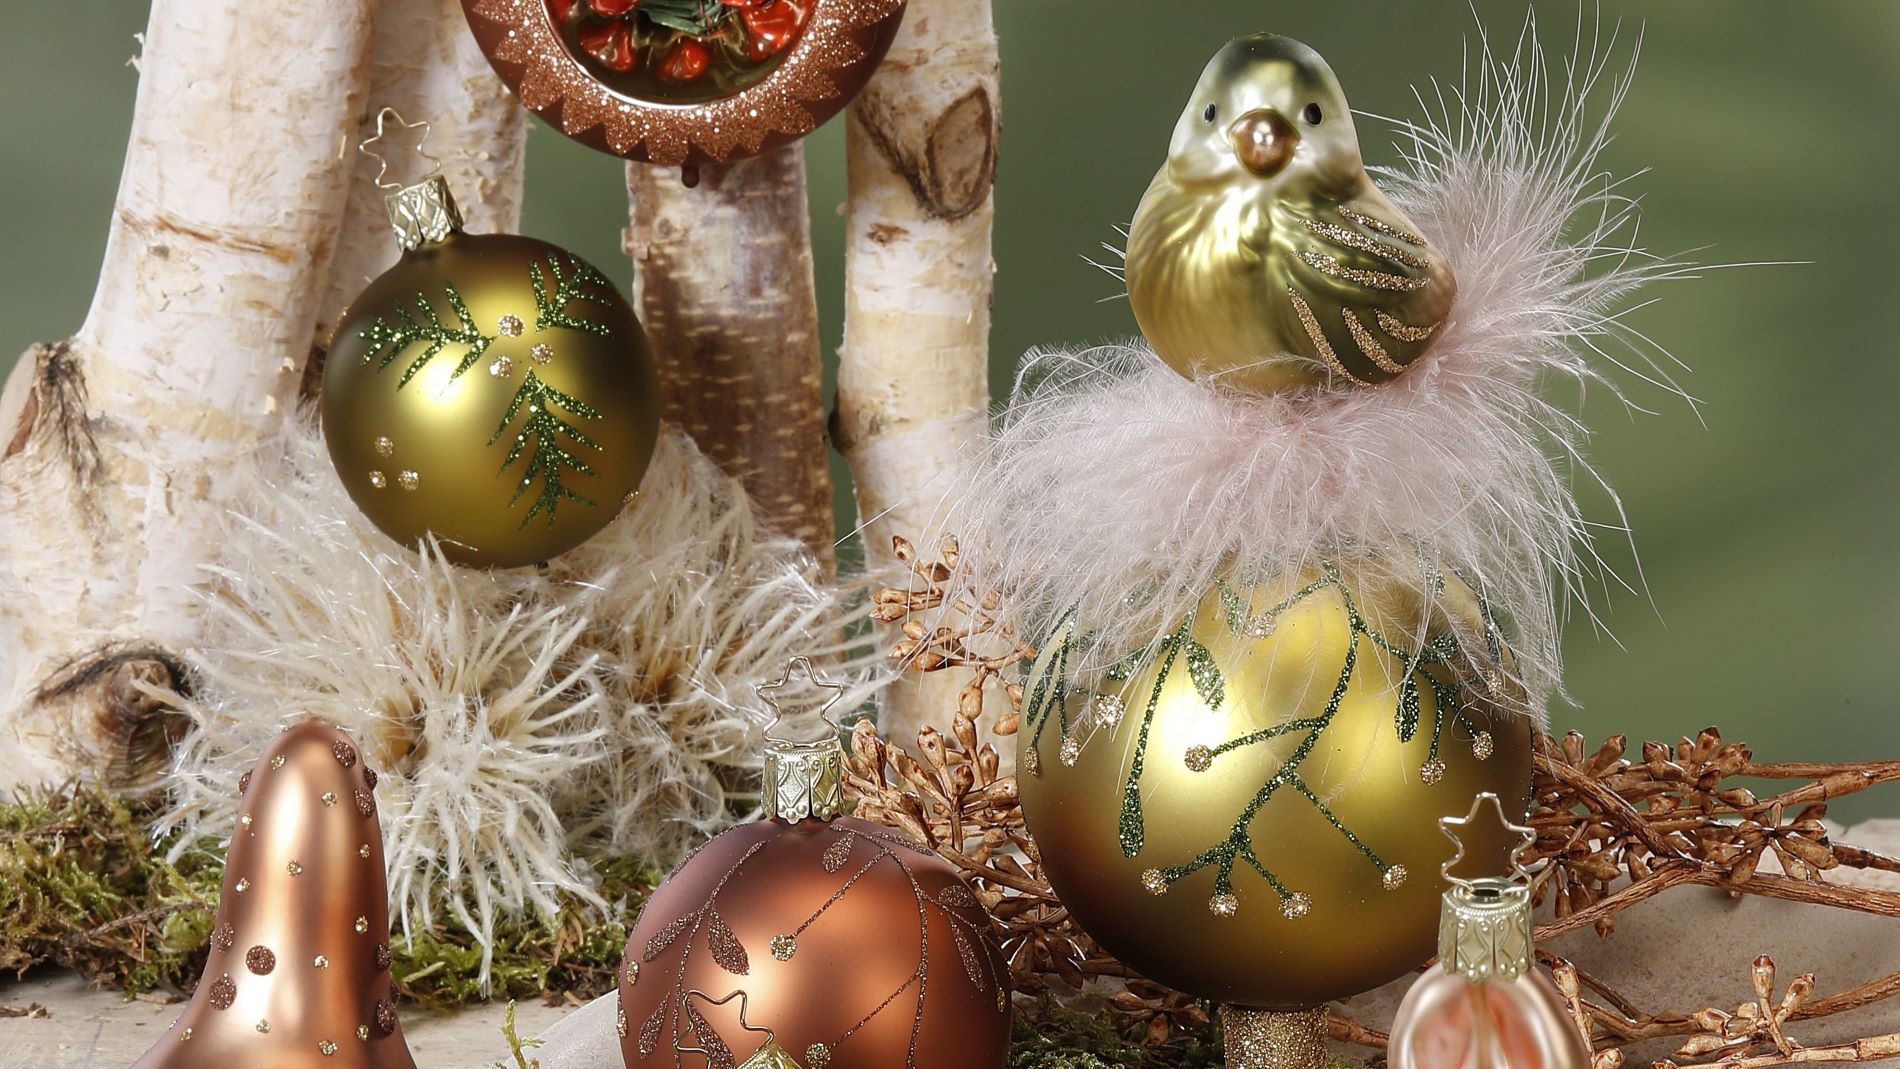 Inge's Christmas Decor: The "Sunny Autumn Day" collection creates a cosy atmosphere.